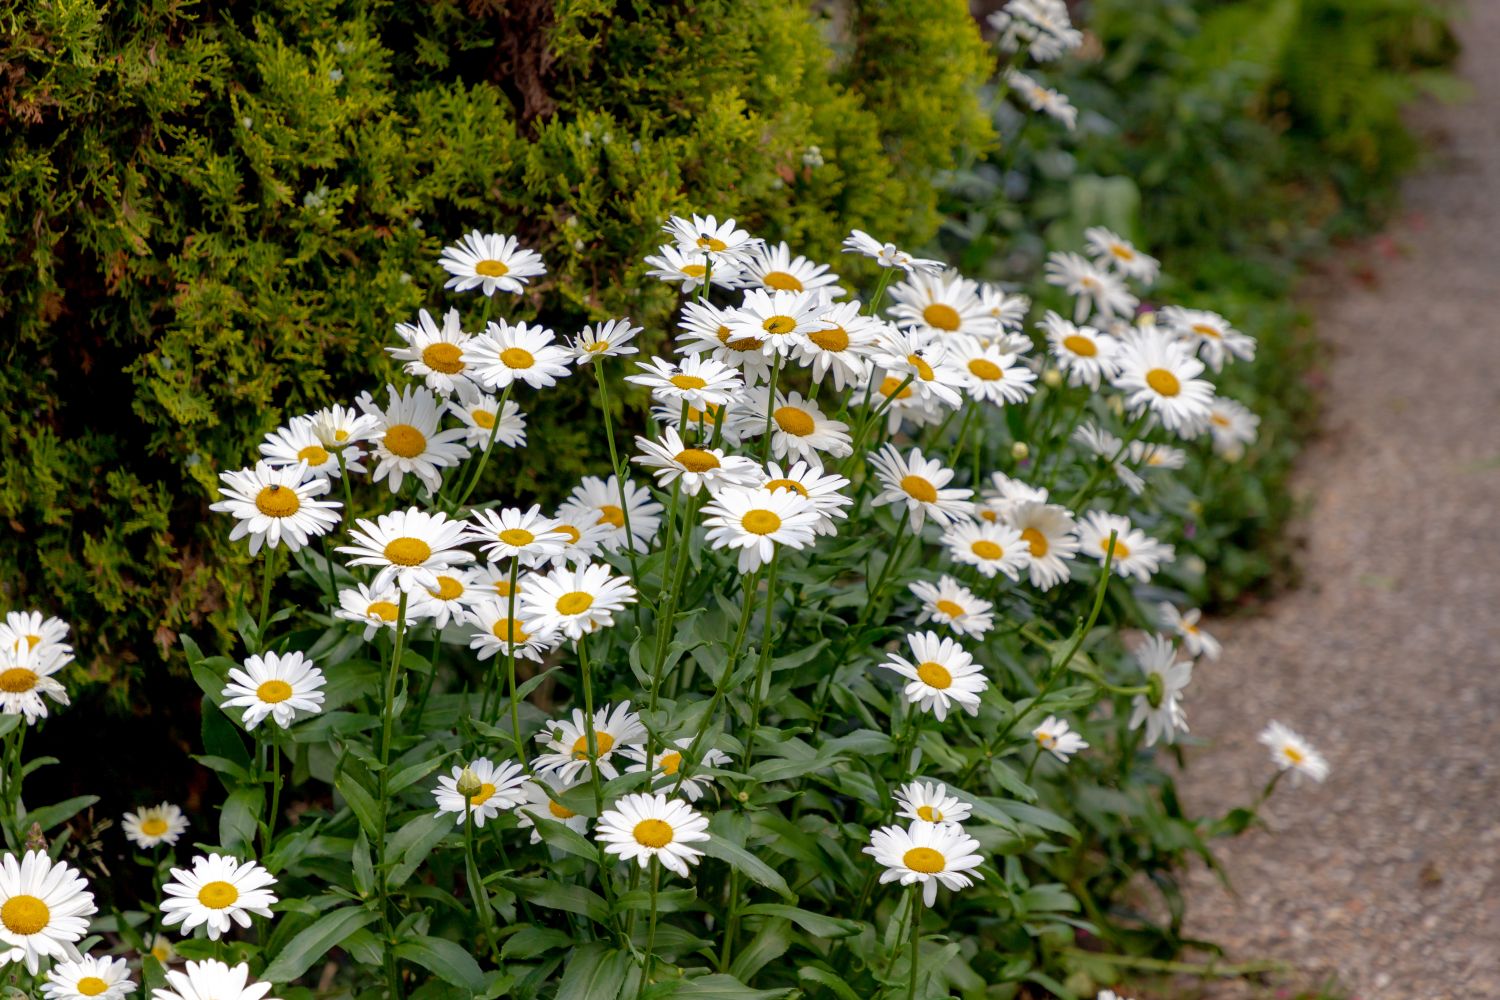 Growing Daisies Made Easy: Follow Our Step-by-Step Guide and Care